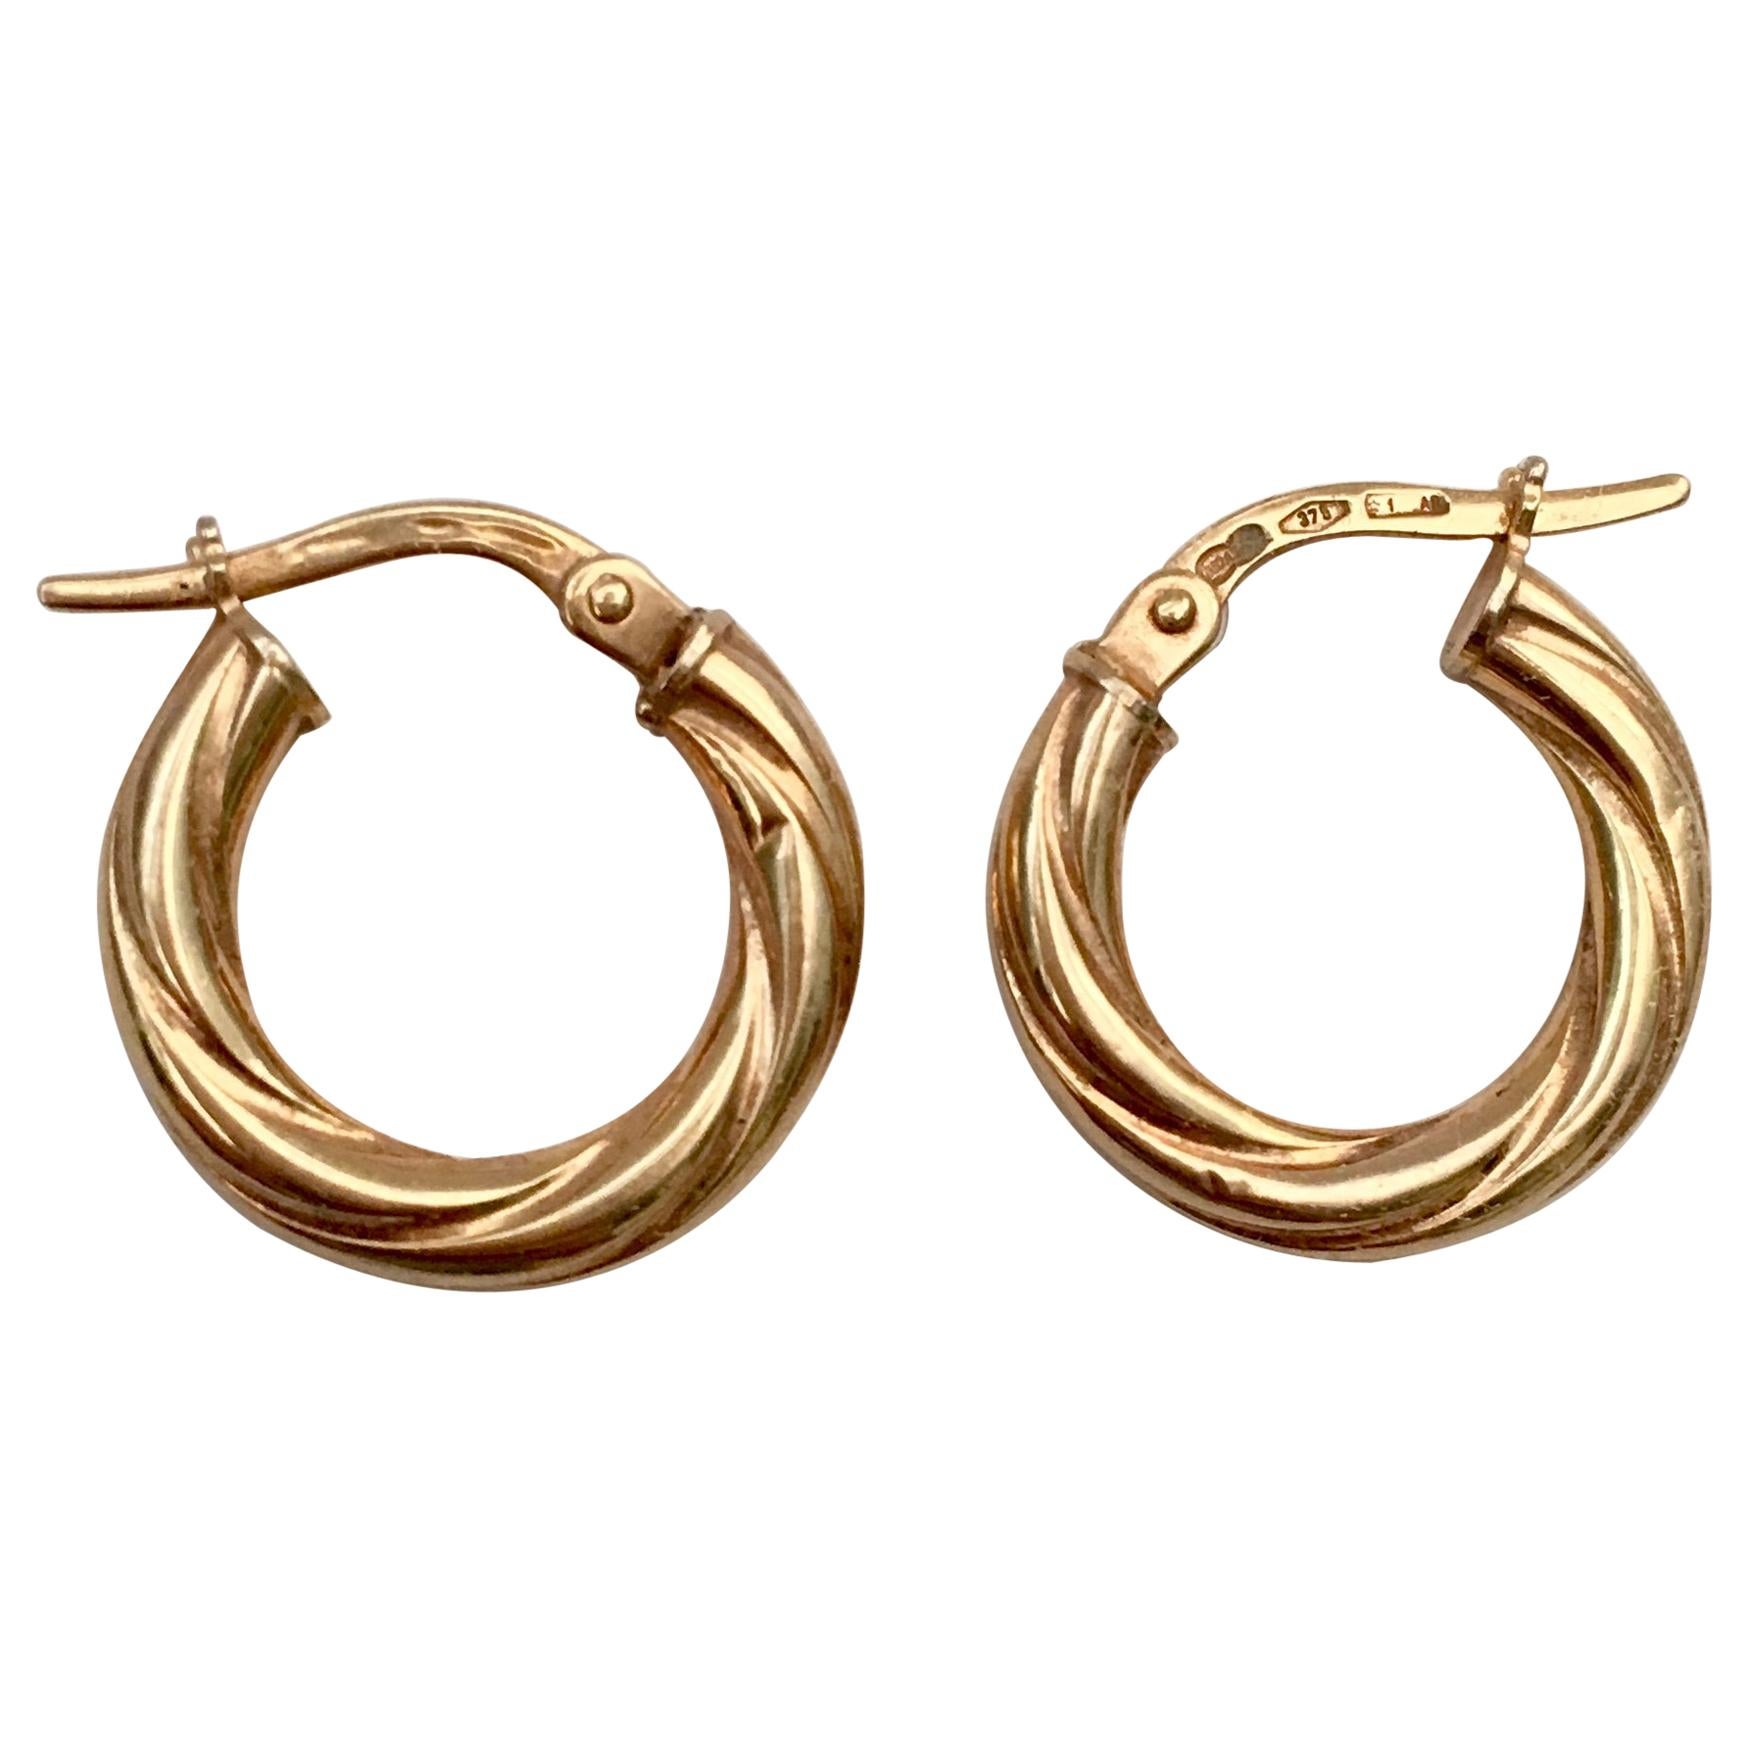 Vintage Gold Hoops Small Twisted Braided Hoop Earrings Yellow Gold For Sale